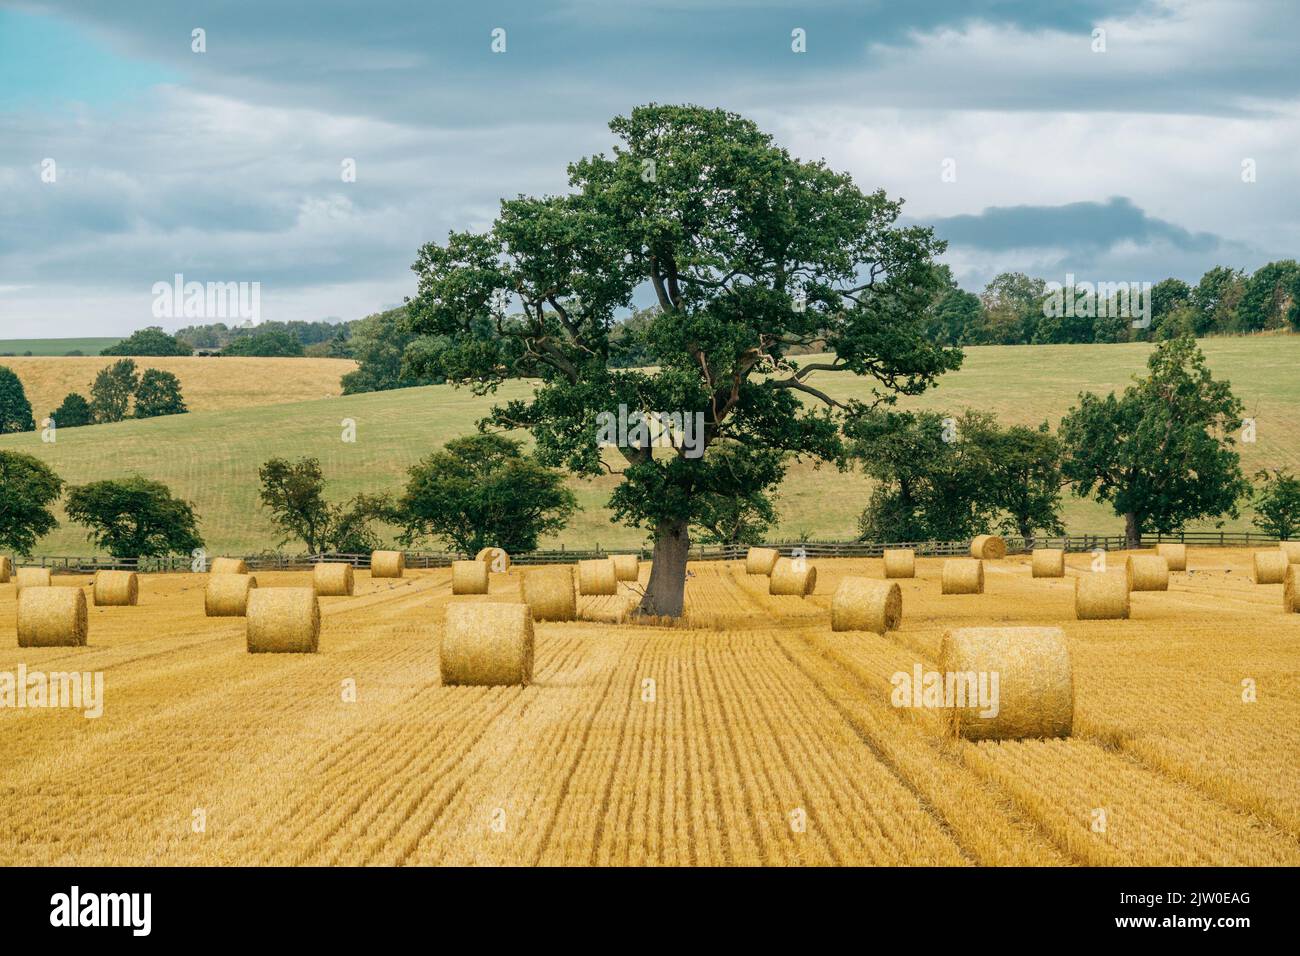 Agricultural field with bales of hay and a tree Stock Photo